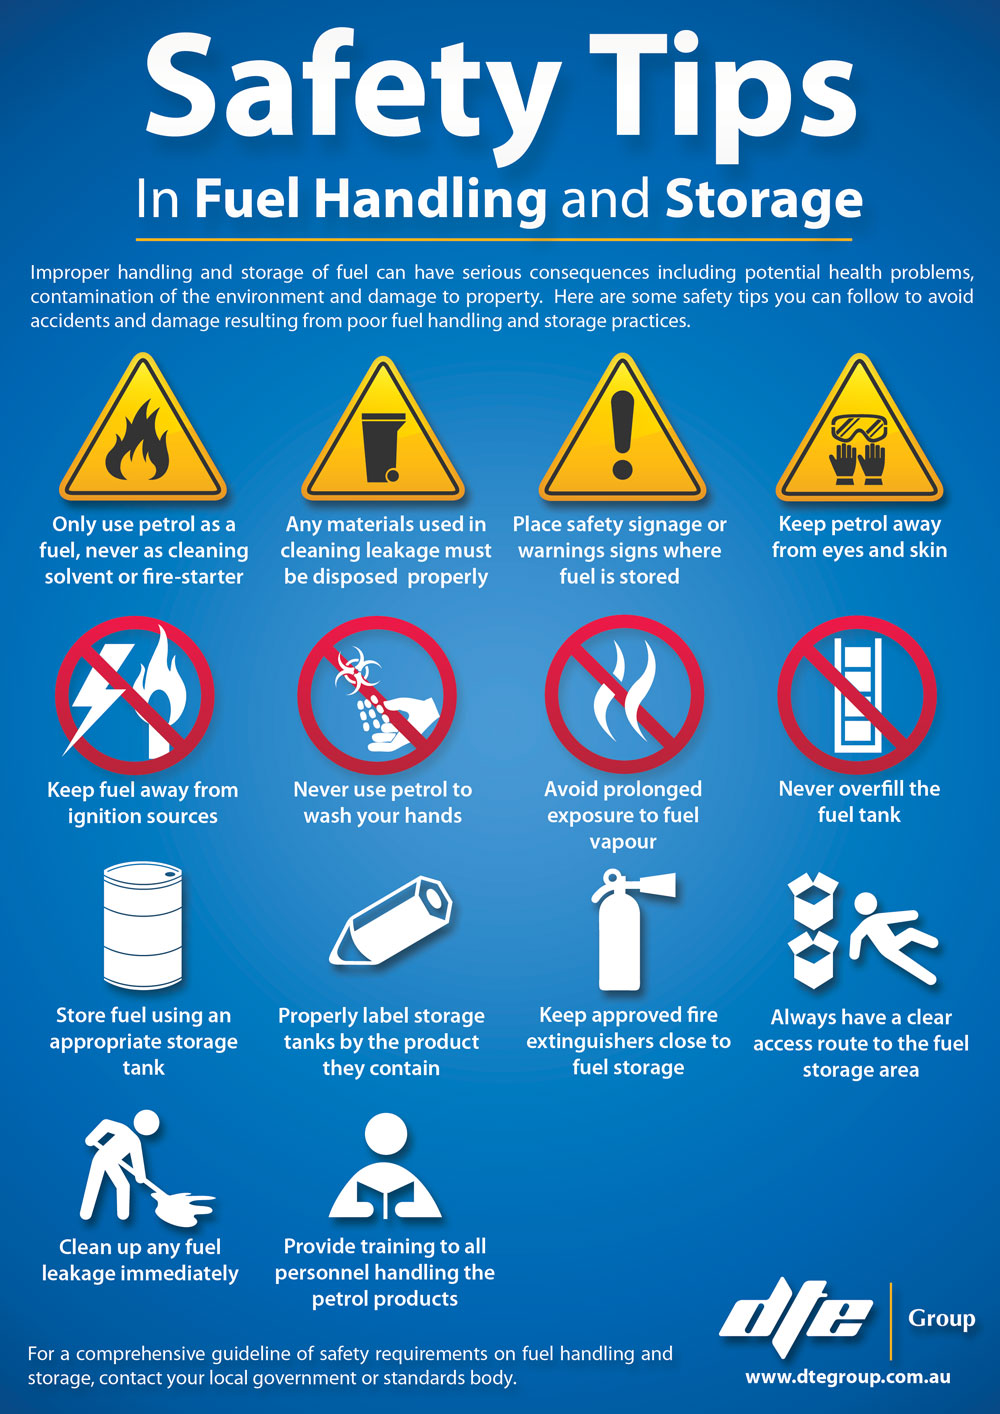 safety-tips-in-fuel-handling-and-storage--free-infographic_50adb0debb24e